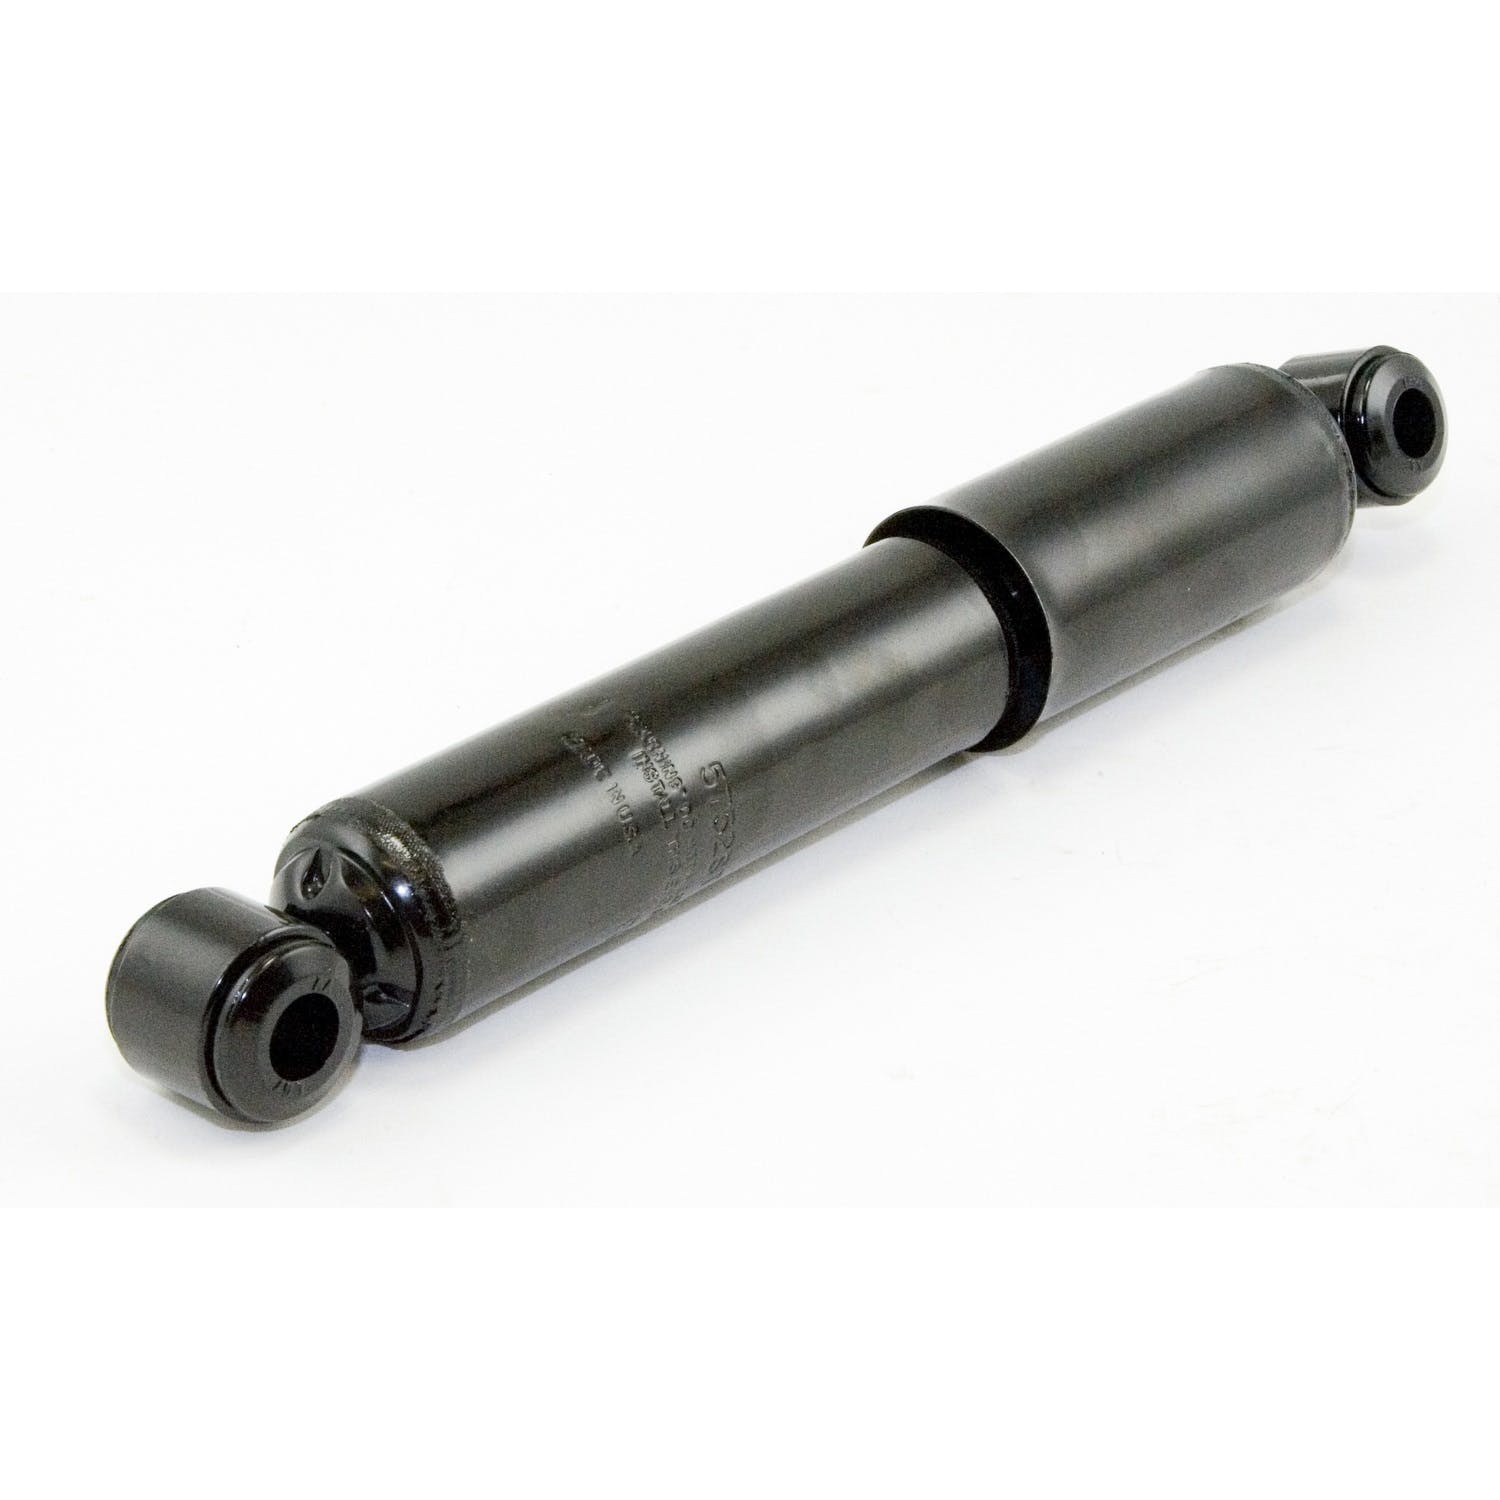 Omix-ADA 18203.10 Front Replacement Shock